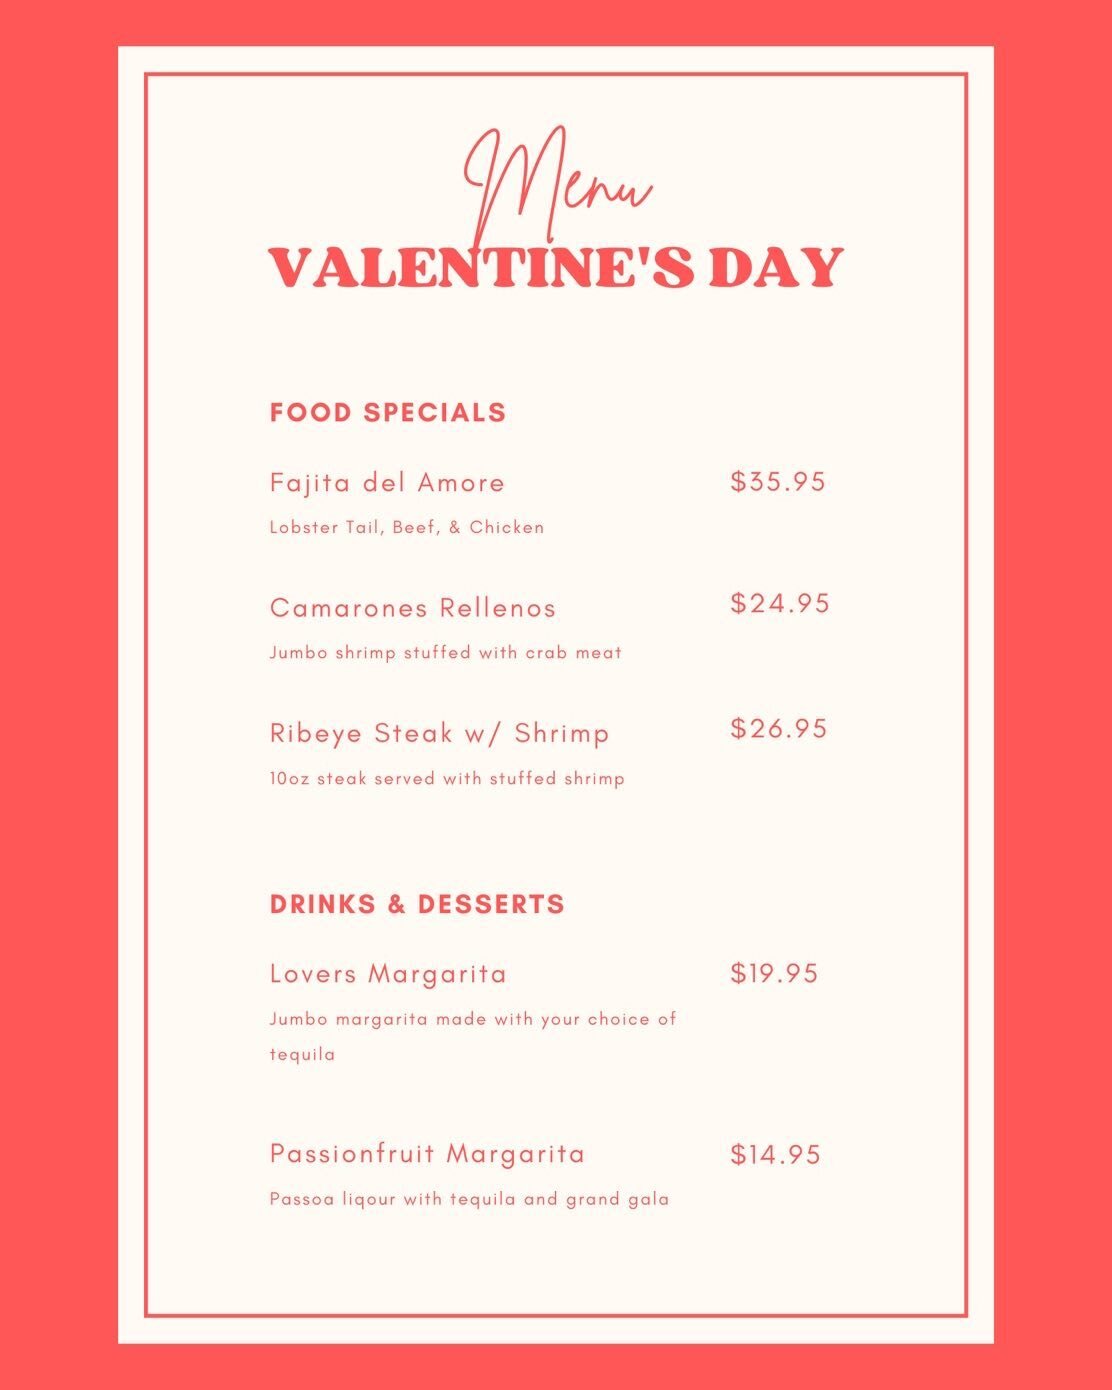 We hope your day is filled with Love and Joy. Join us as we celebrate Love with our special Valentines Day Menu and a live acoustic guitar performance at our Arlington location.